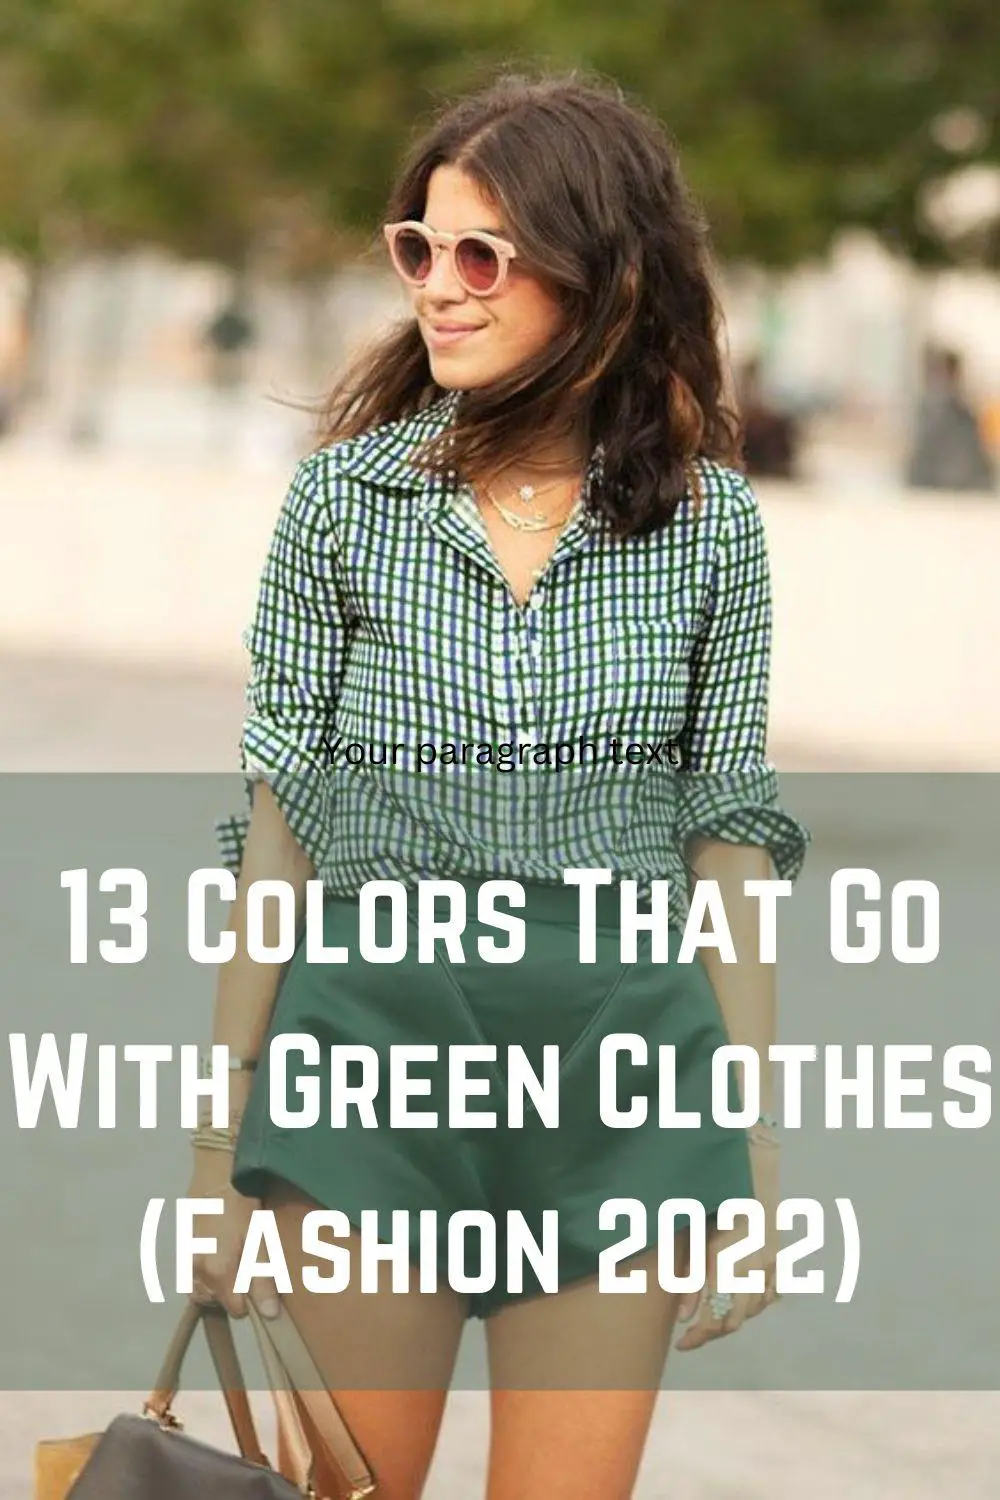 13 Colors That Go With Green Clothes (Fashion 2022)